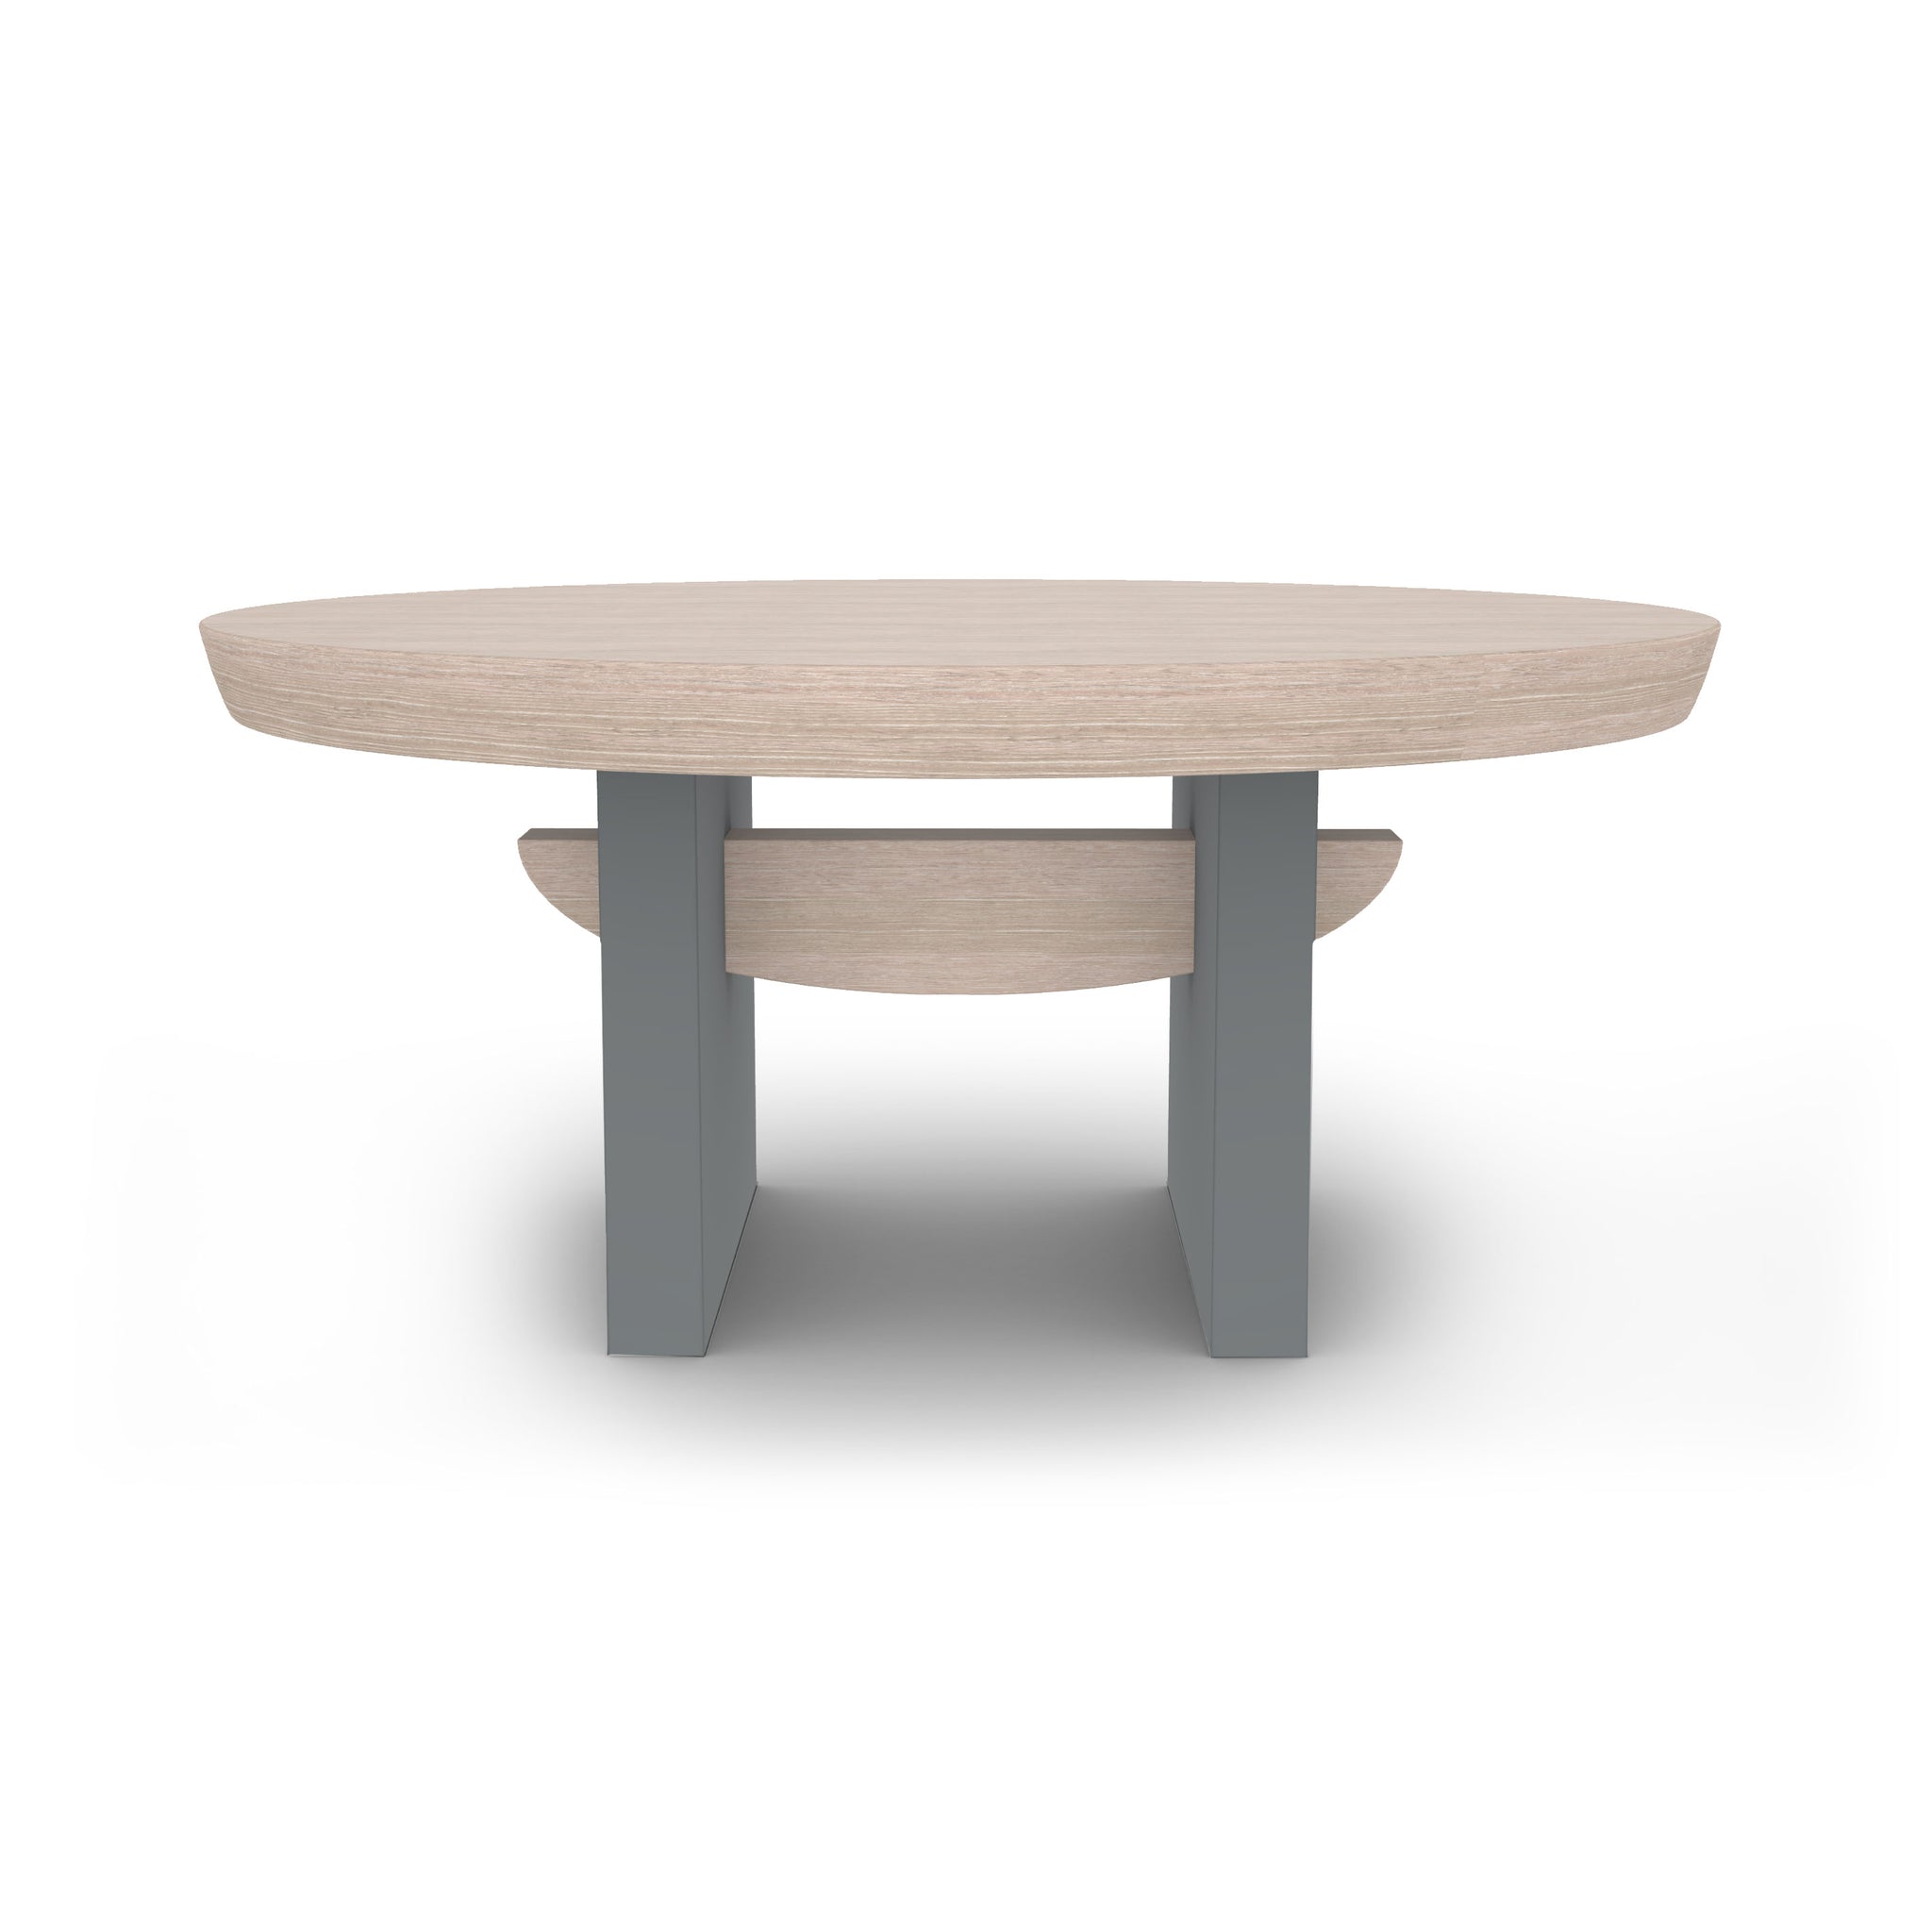 Boat Hull Dining Table in Slate with White Oak Top - SAMPLE SALE